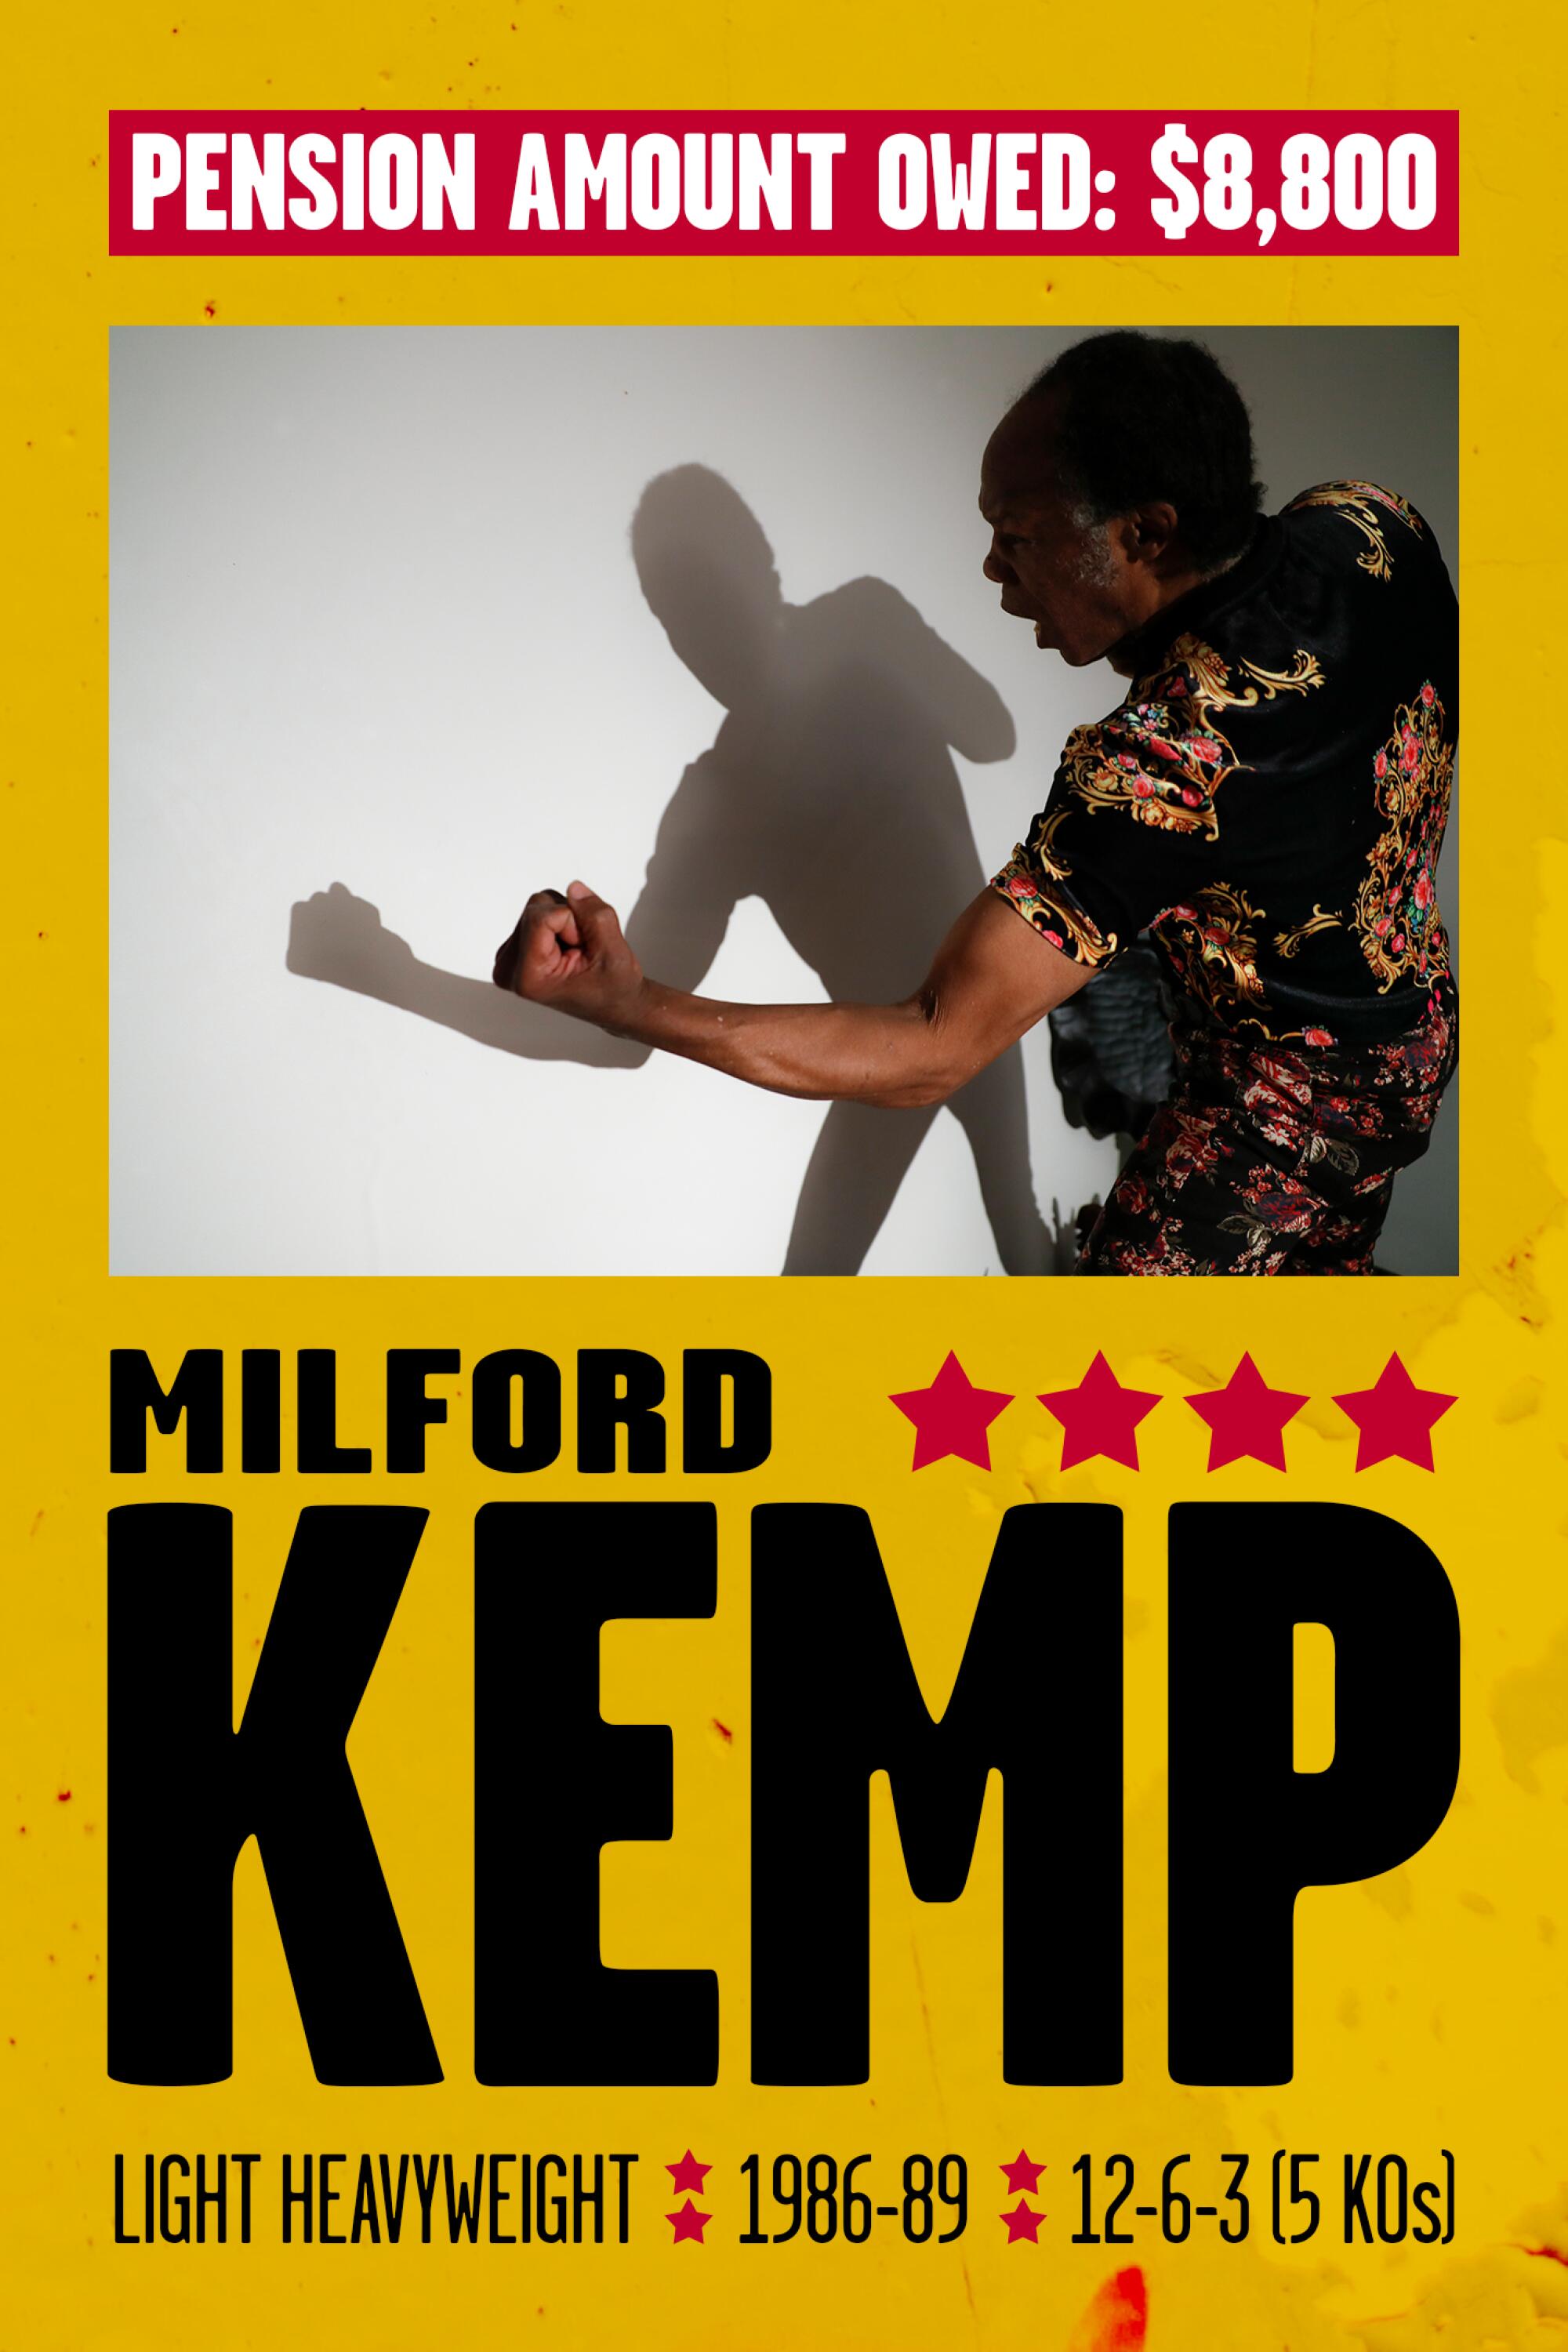 Fight poster for Milford Kemp, light heavyweight, 1986-89, 12-6-3 (5 KOs), pension owed: $8,800